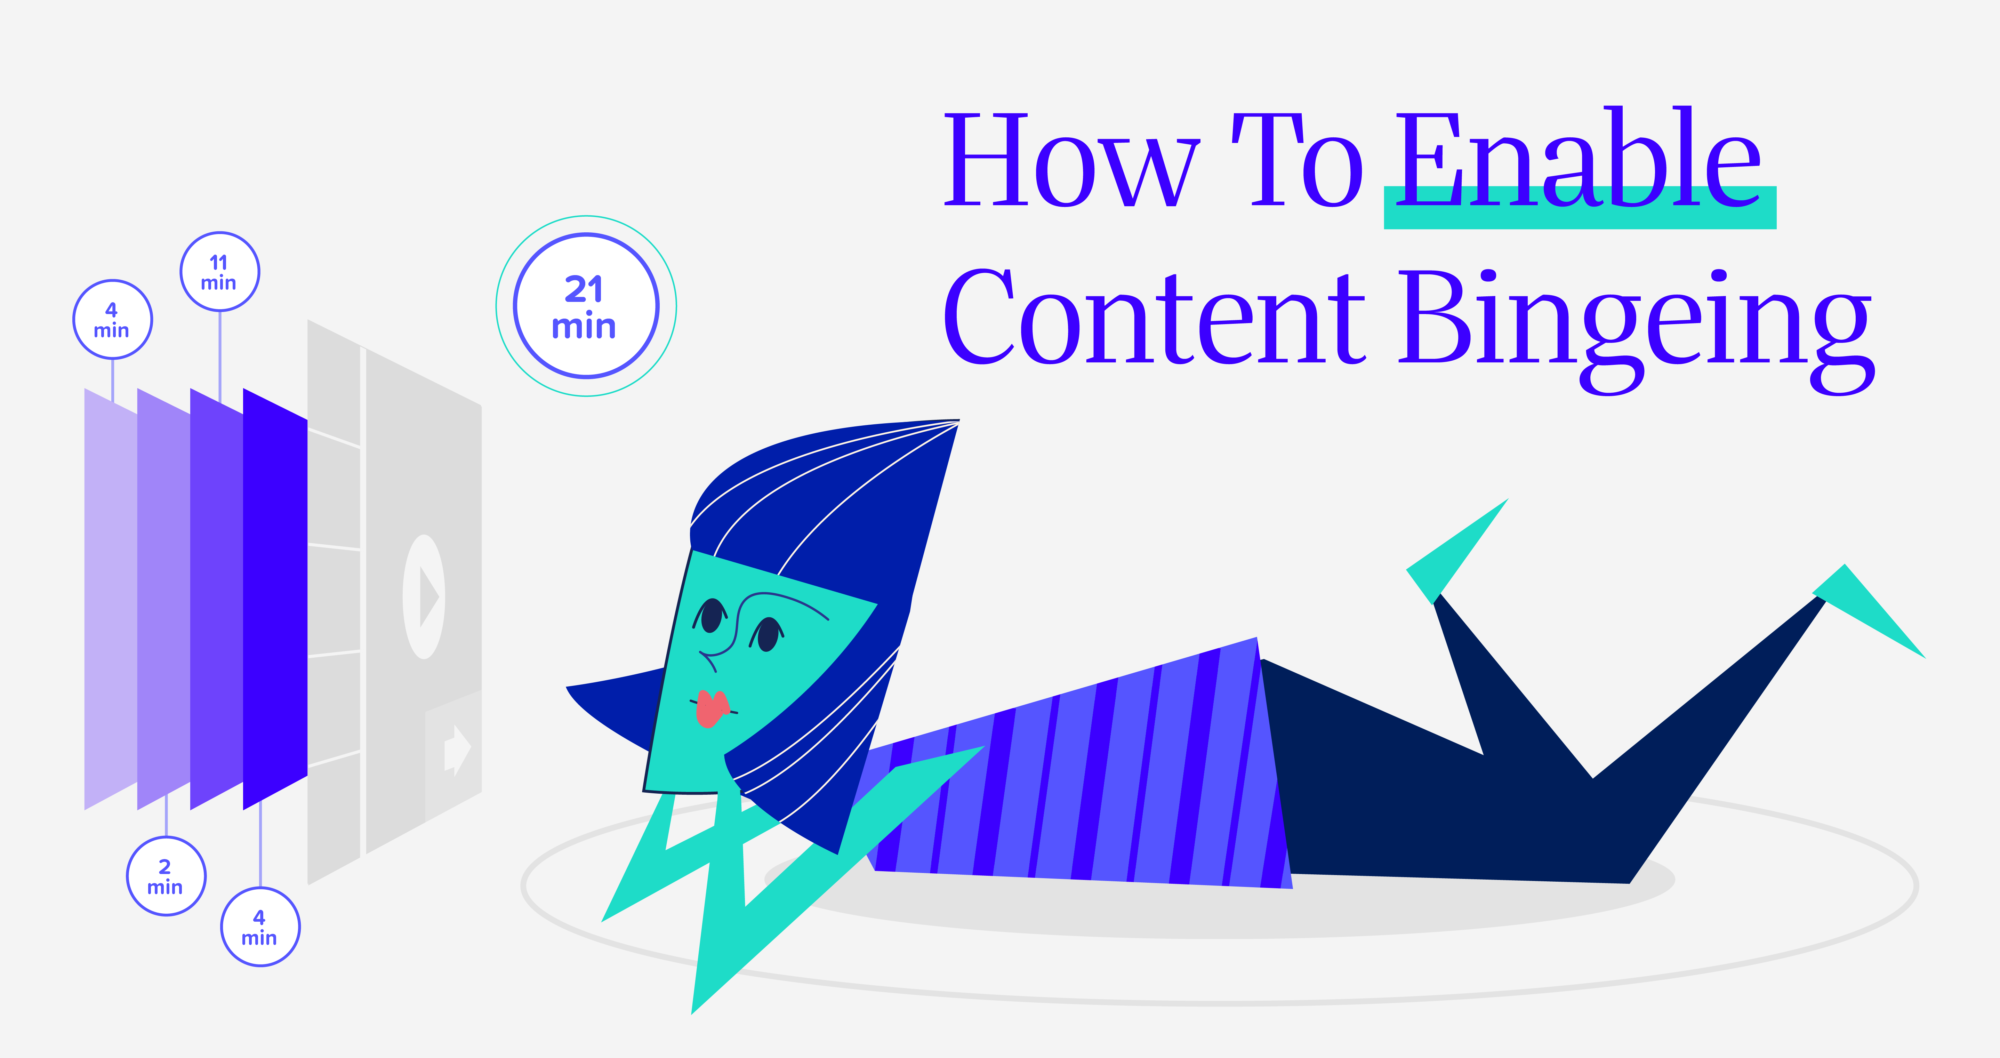 How to Enable Content Bingeing